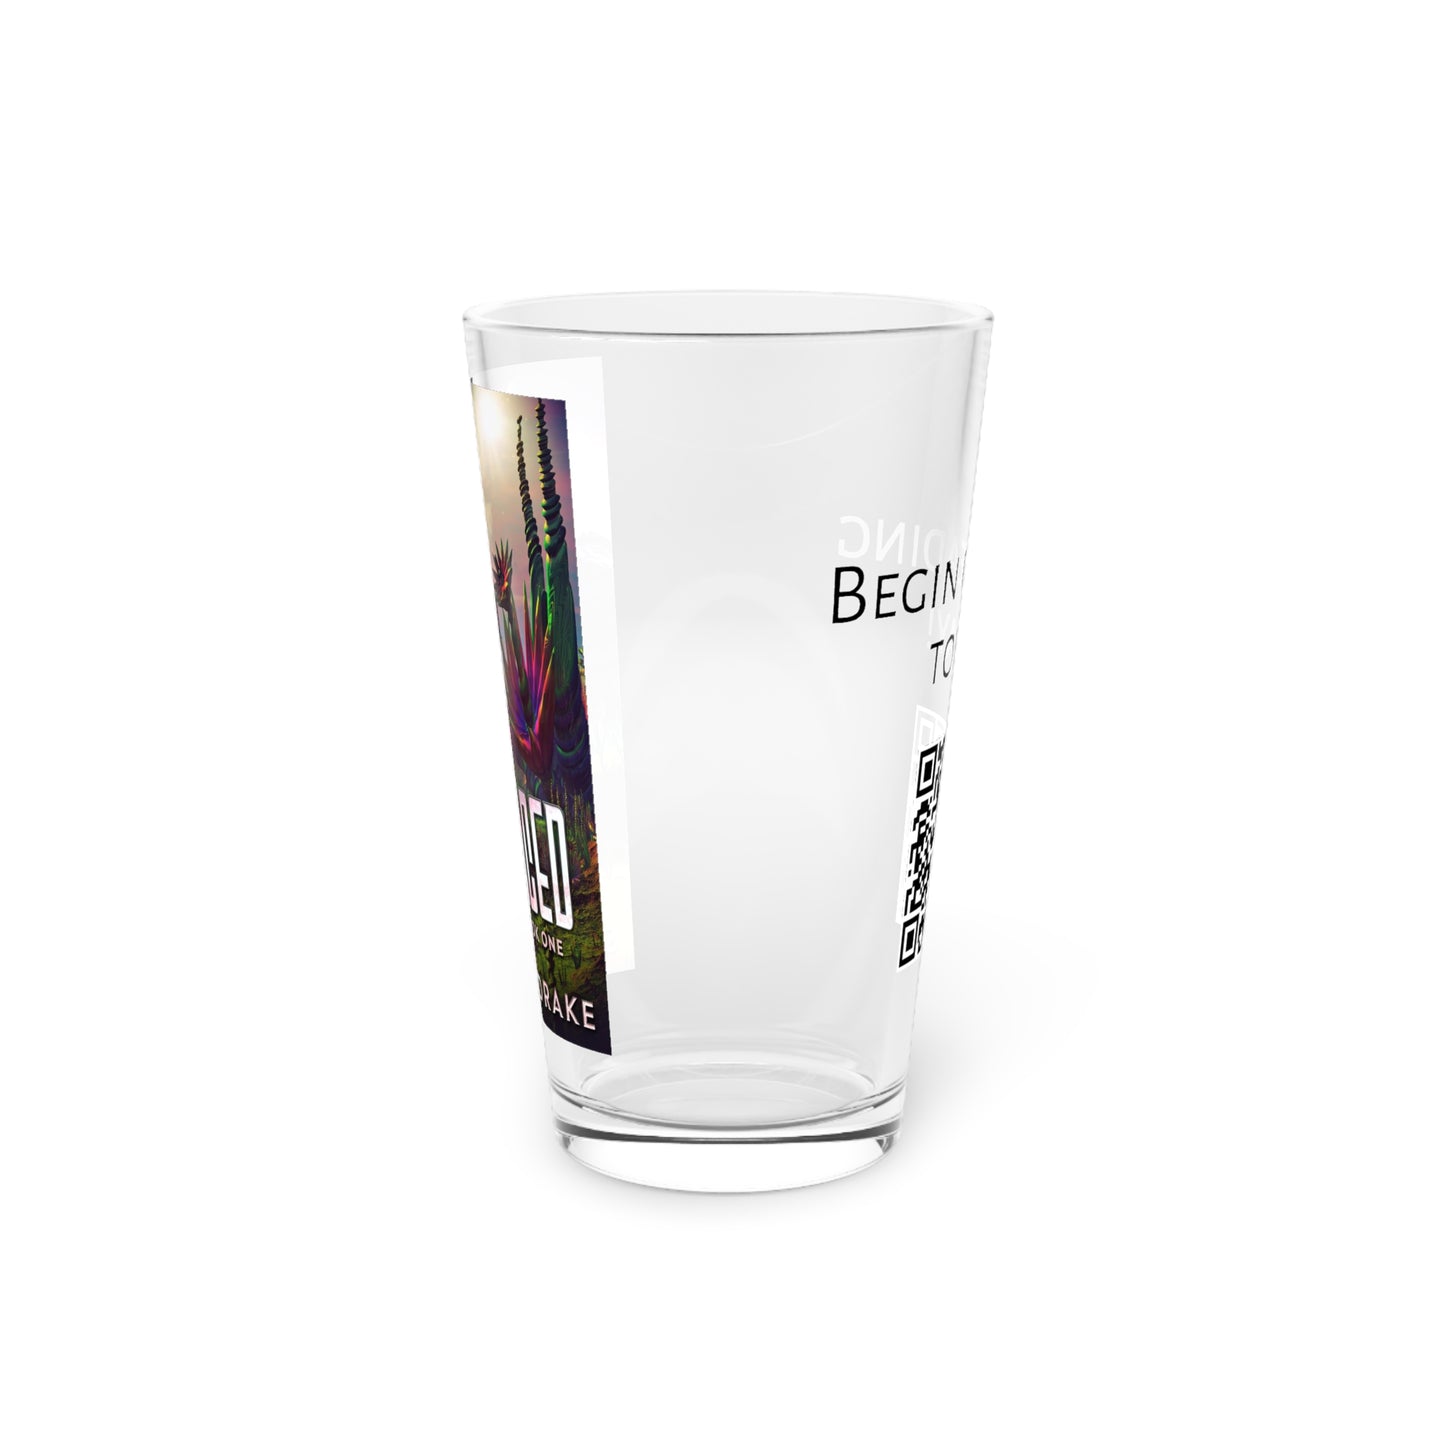 Displaced - Pint Glass